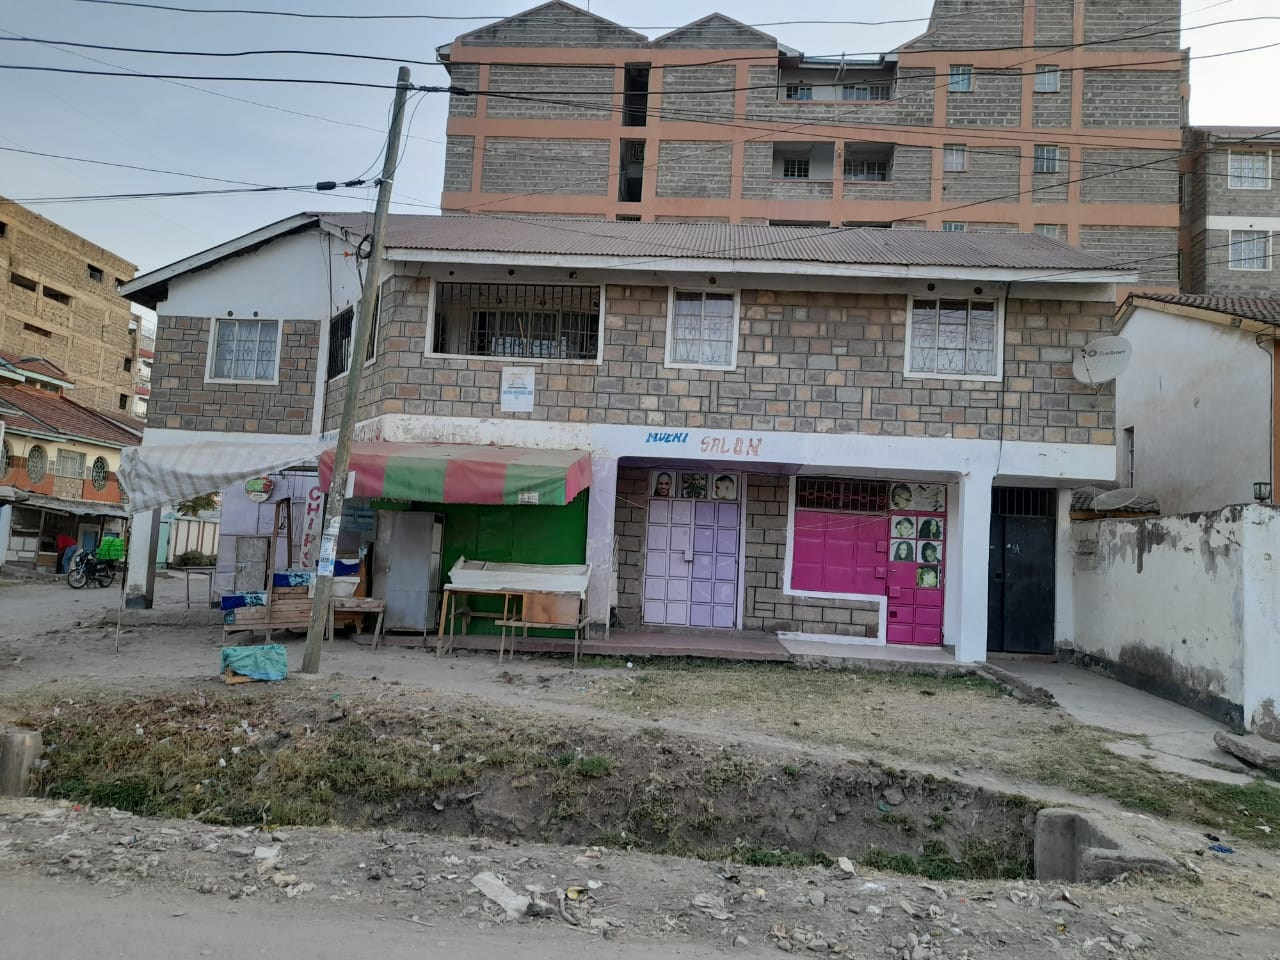 Commercial Property For Sale. Situated in a corner plot measuring 66 by 75, featuring commercial shops and flats. Asking price. 24 M. Musilli Homes.